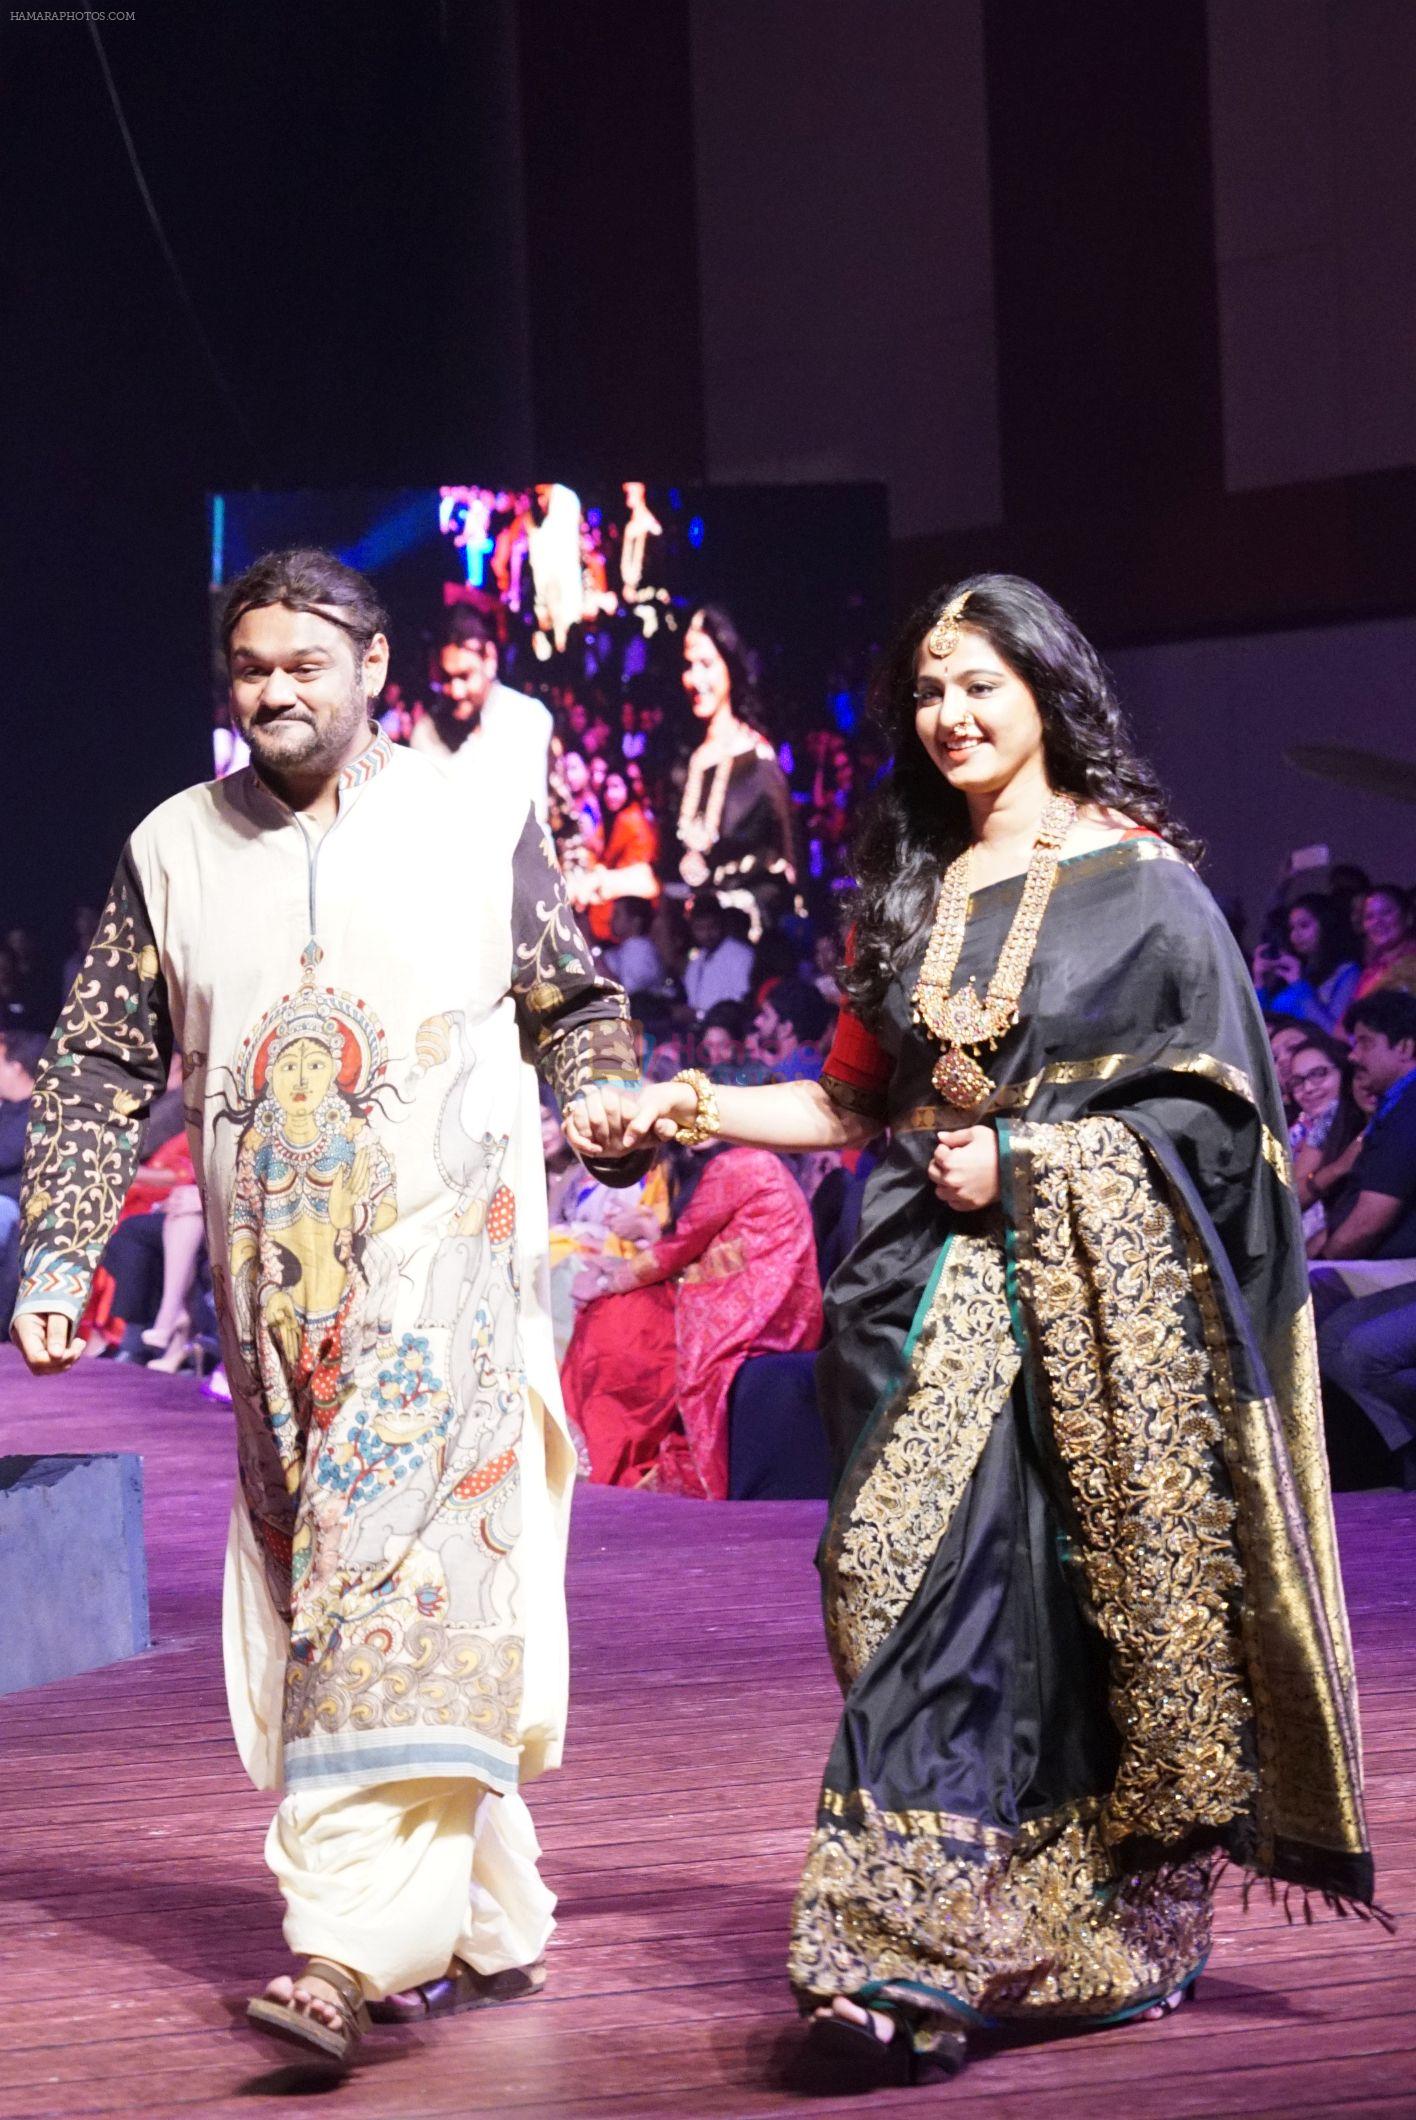 Anushka Shetty at An Ode To Weaves and Weavers Fashion show at HICC Novotel, Hyderabad on June 21, 2016